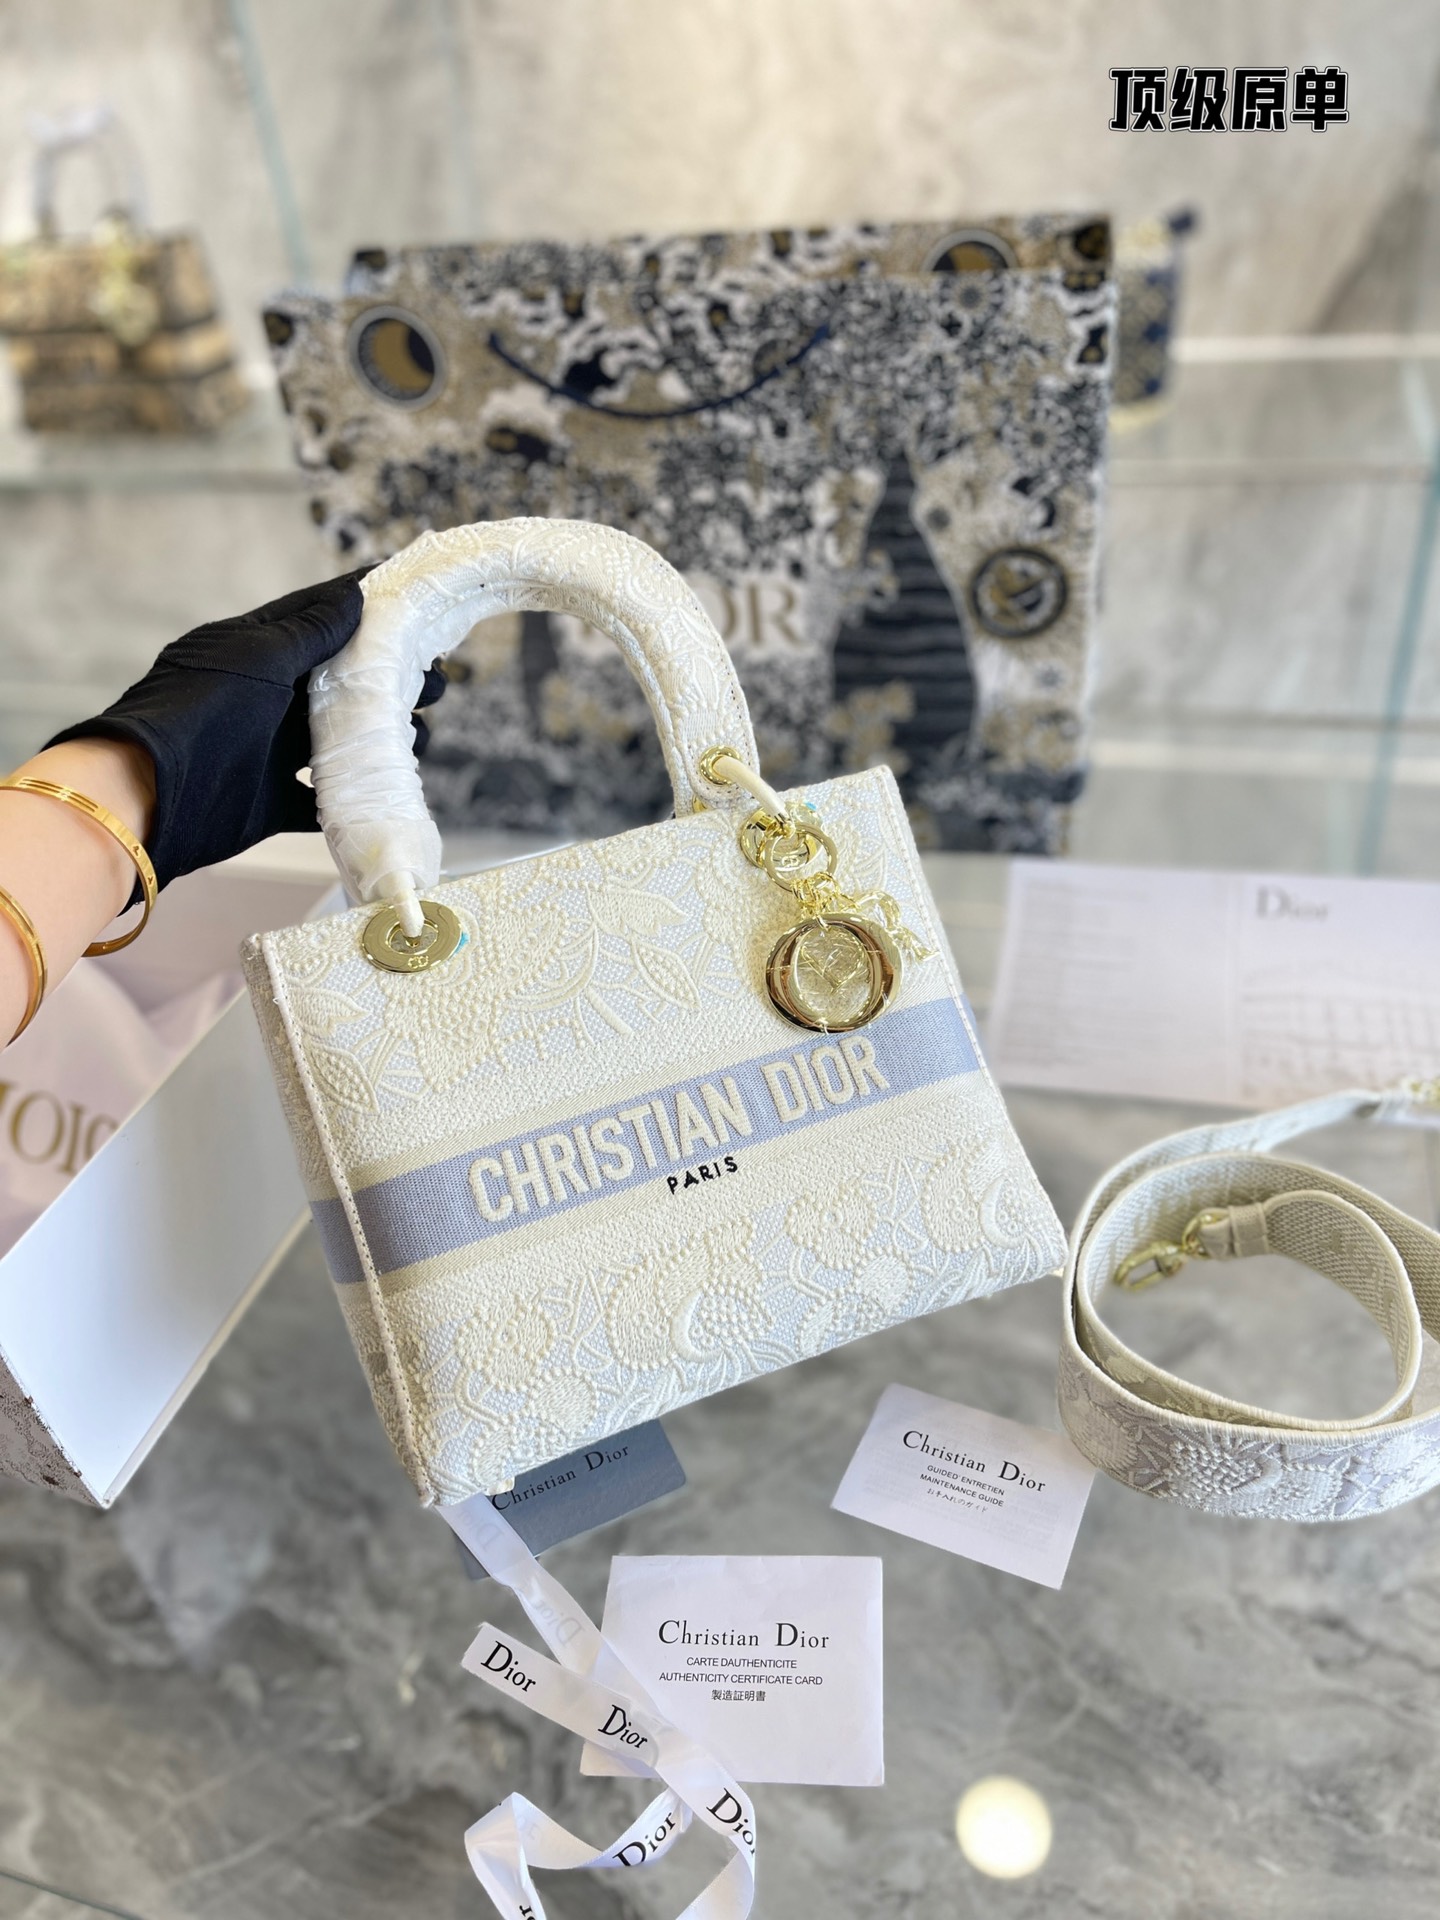 Christian Dior Lady-Life embroideried limited edition bags